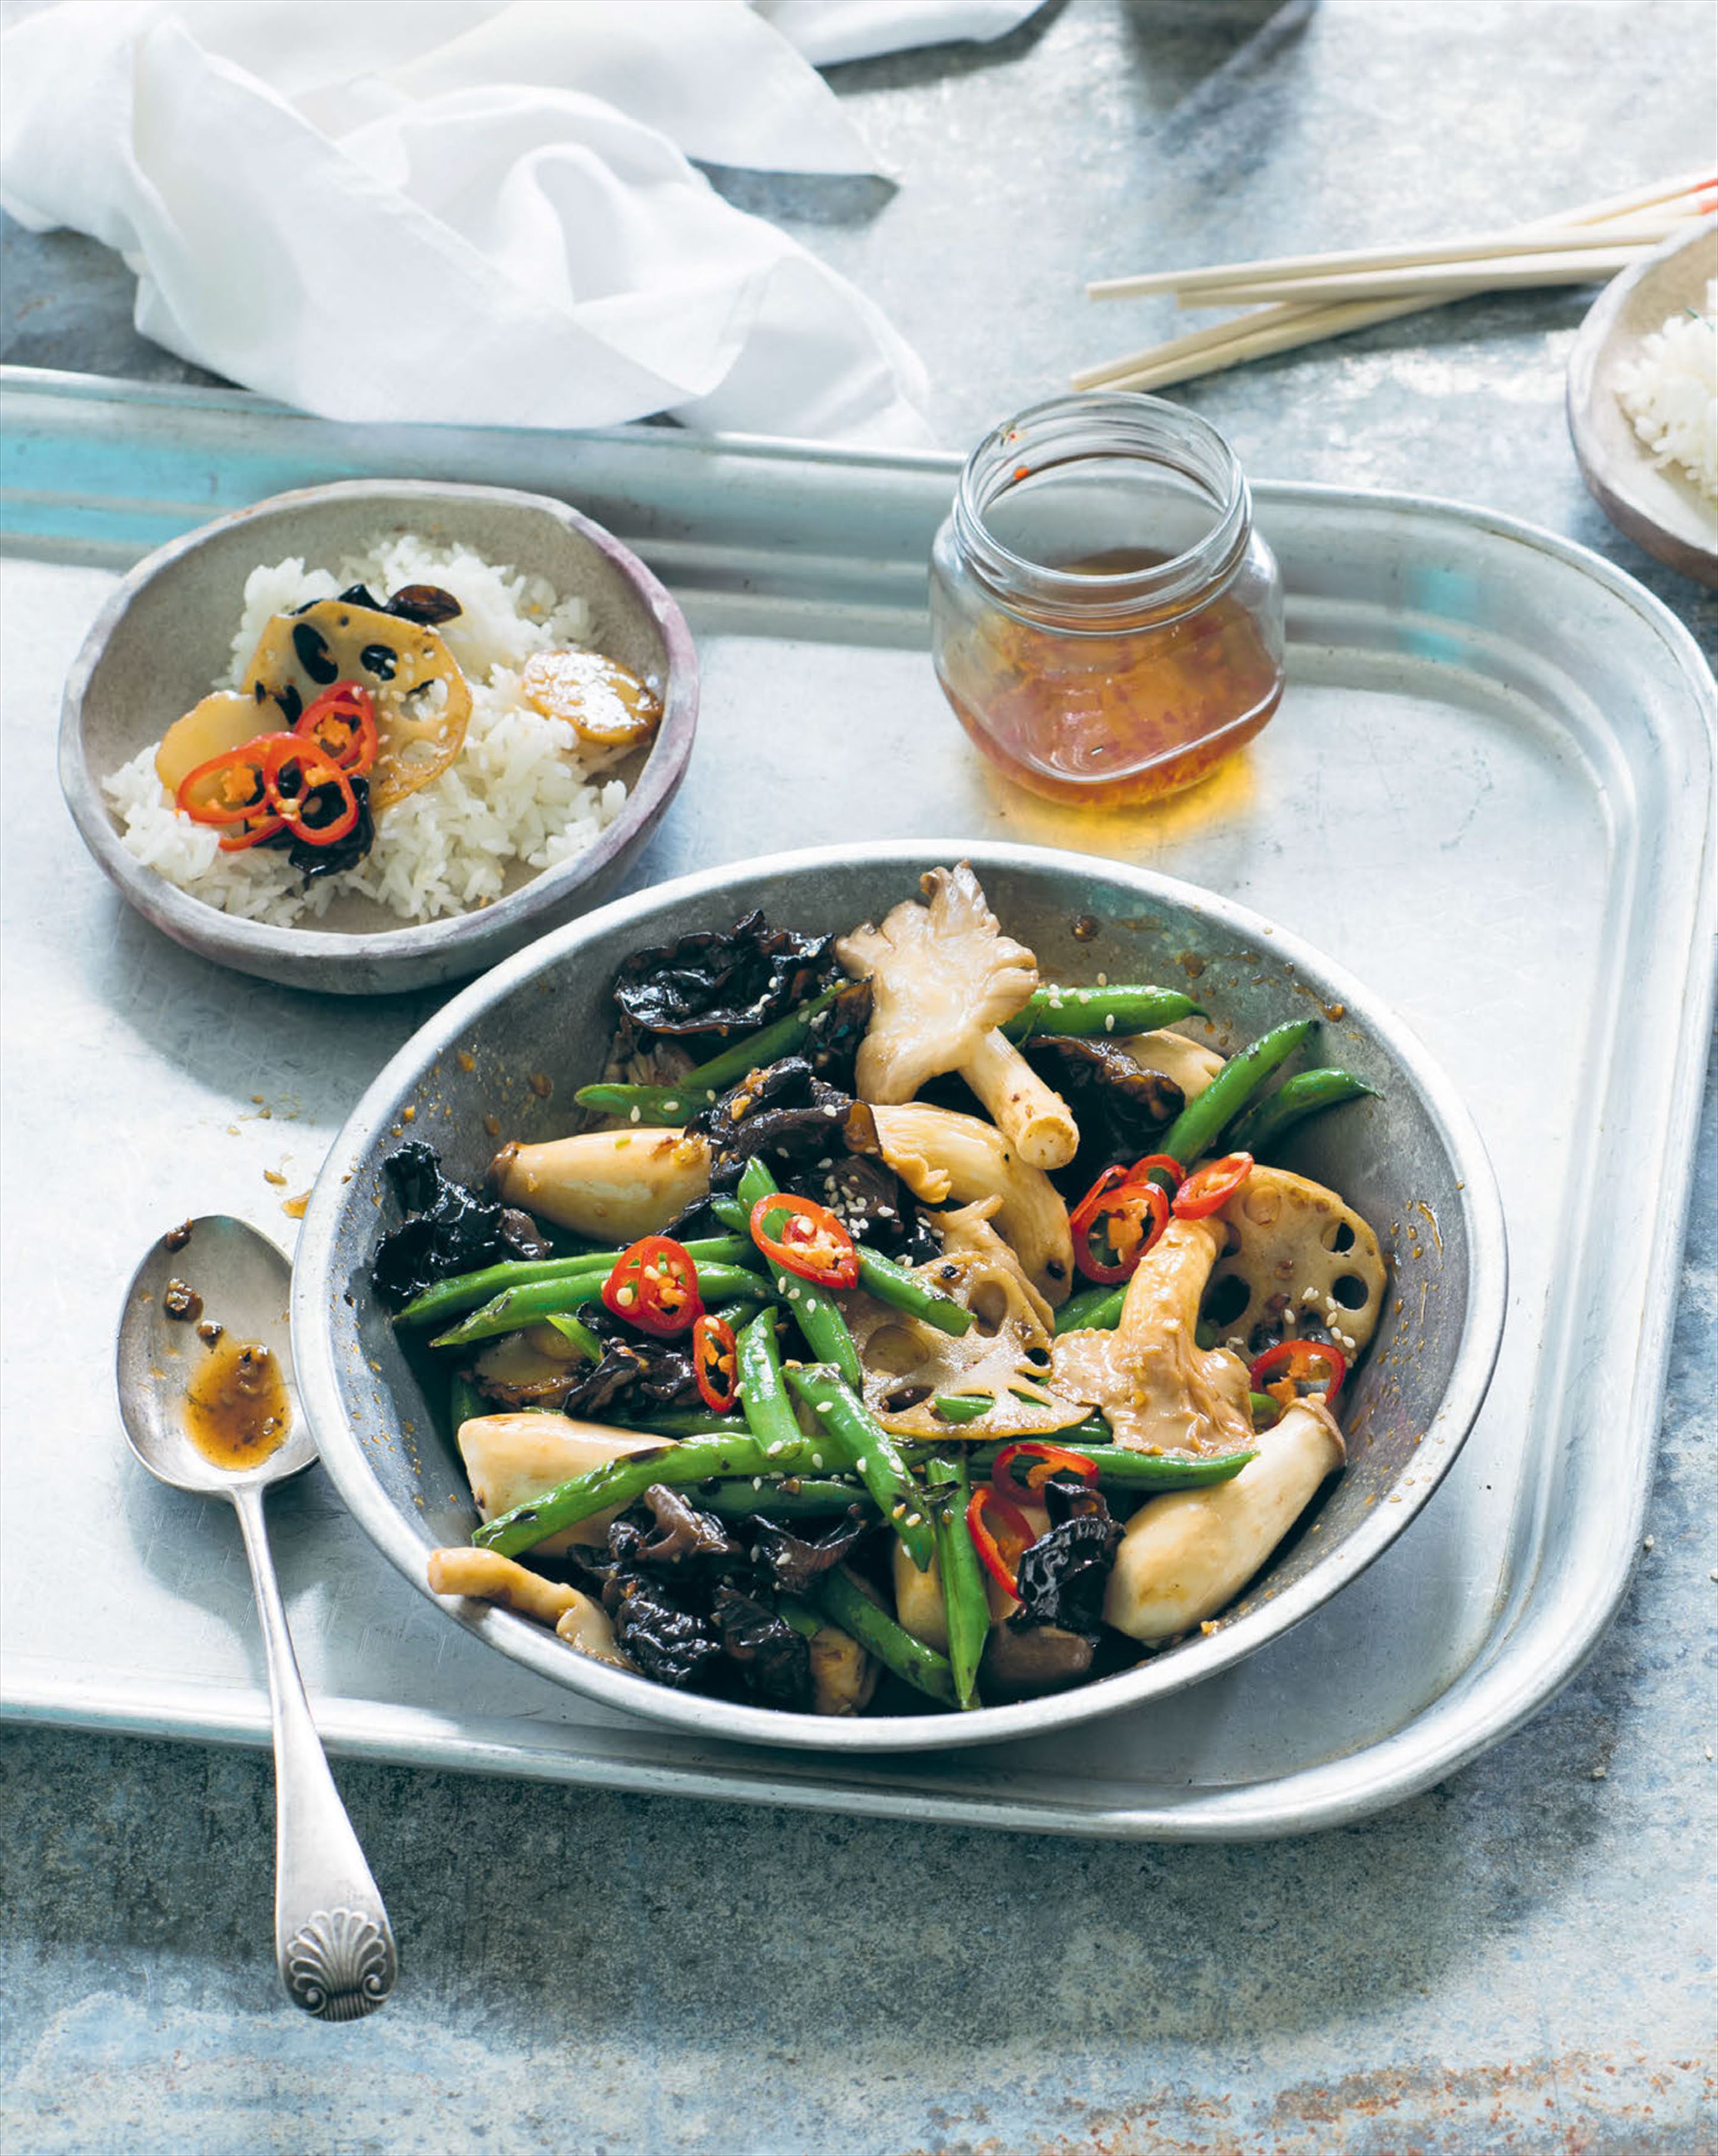 French beans wok-tossed with Asian mushrooms, lotus root & water chestnuts